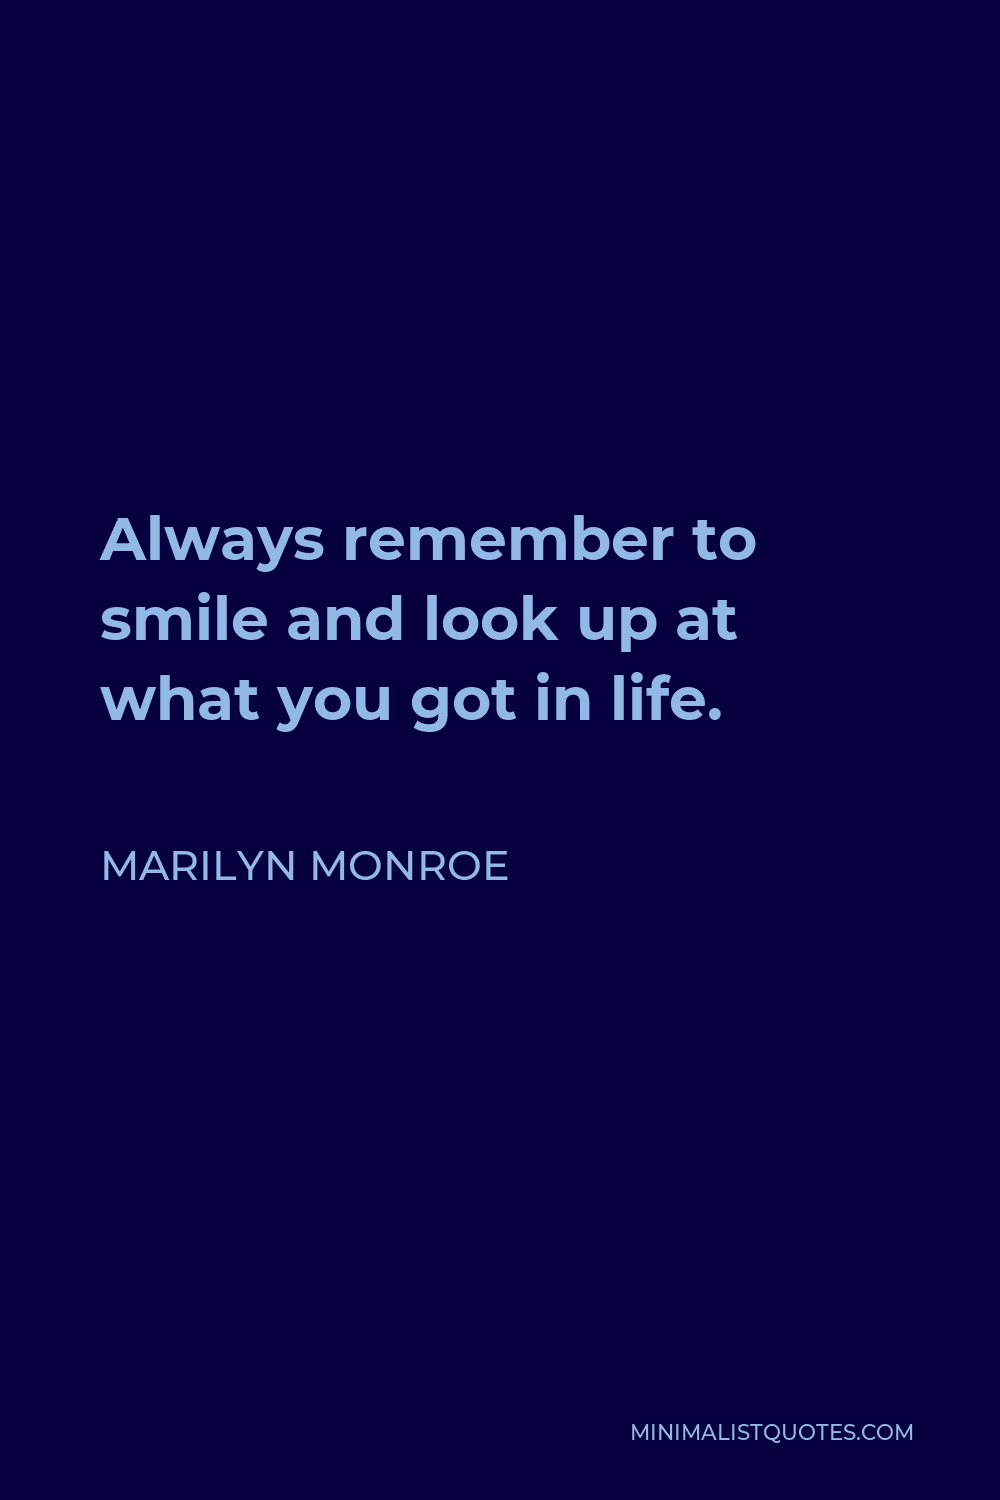 Marilyn Monroe Quote - Always remember to smile and look up at what you got in life.